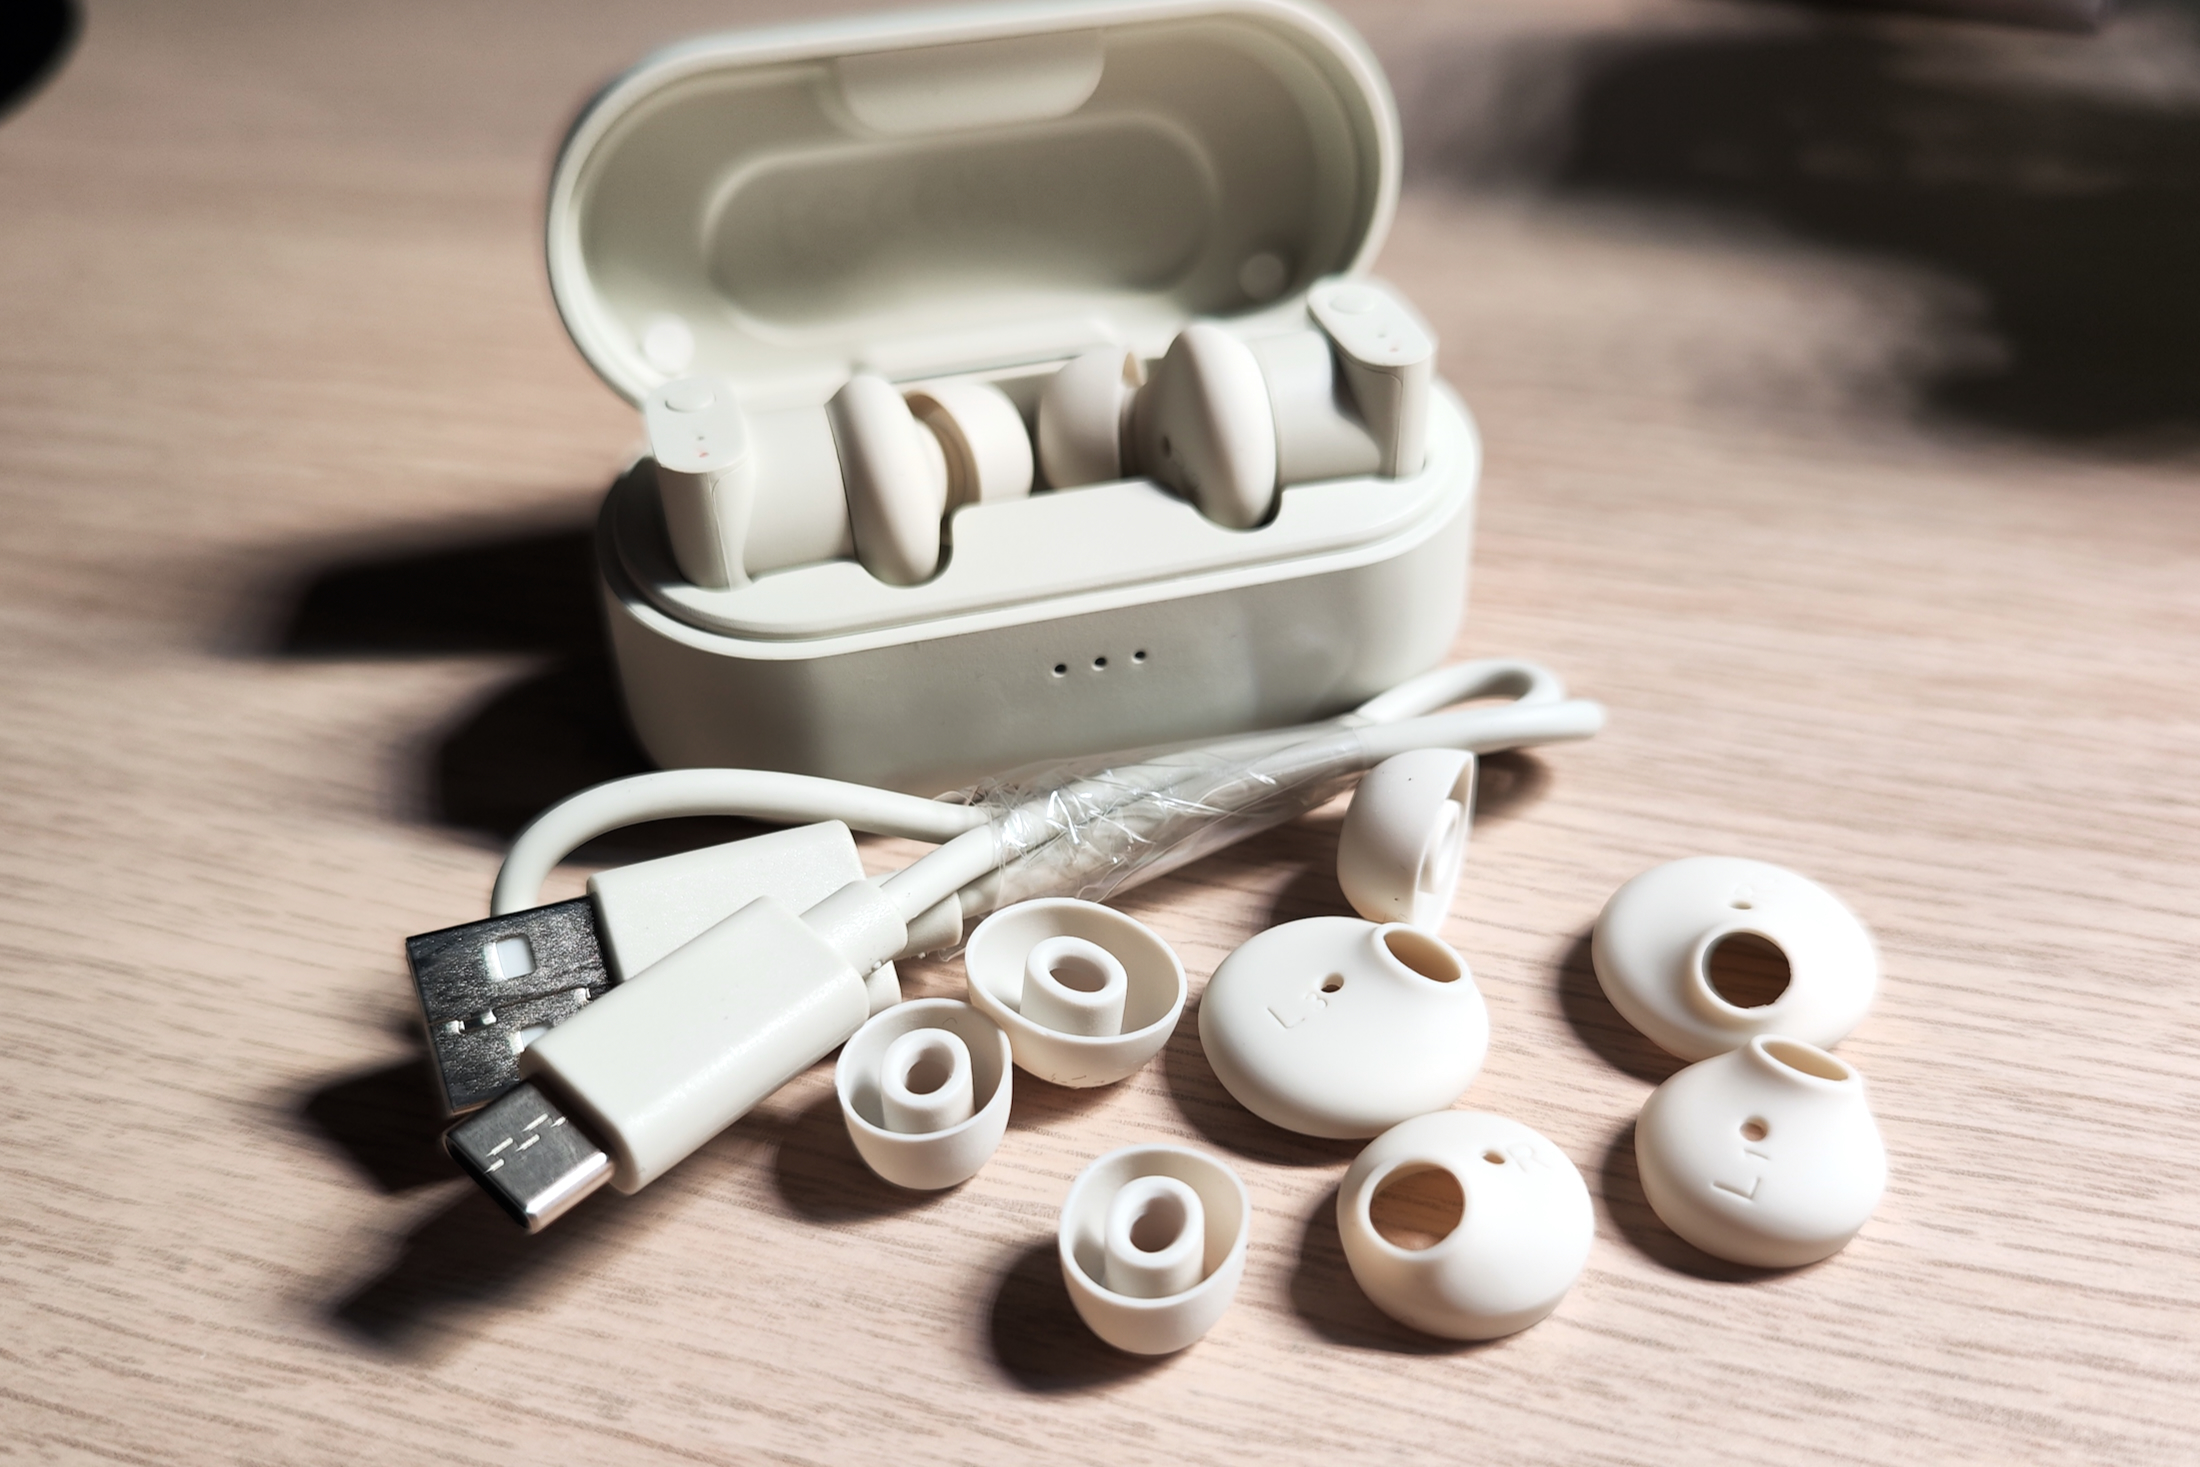 Status Between 3ANC Review: The Best Wireless Earbuds of 2023